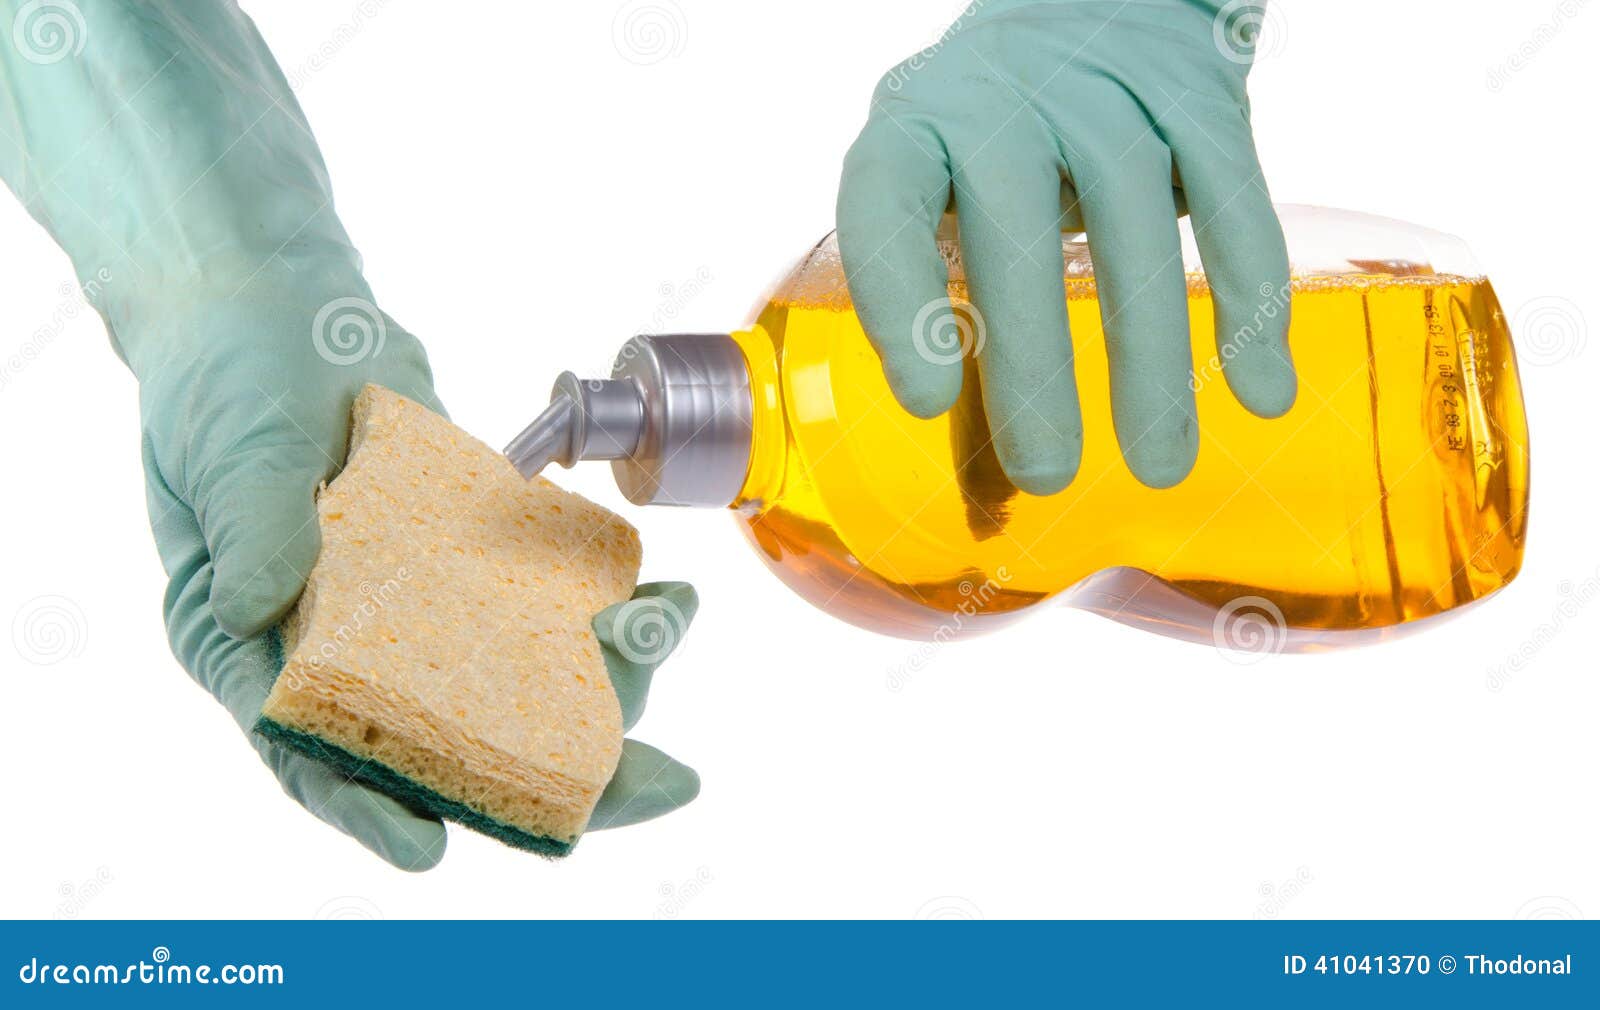 Hands Putting Liquid Dish Soap On A Sponge Stock Photo - Image of work